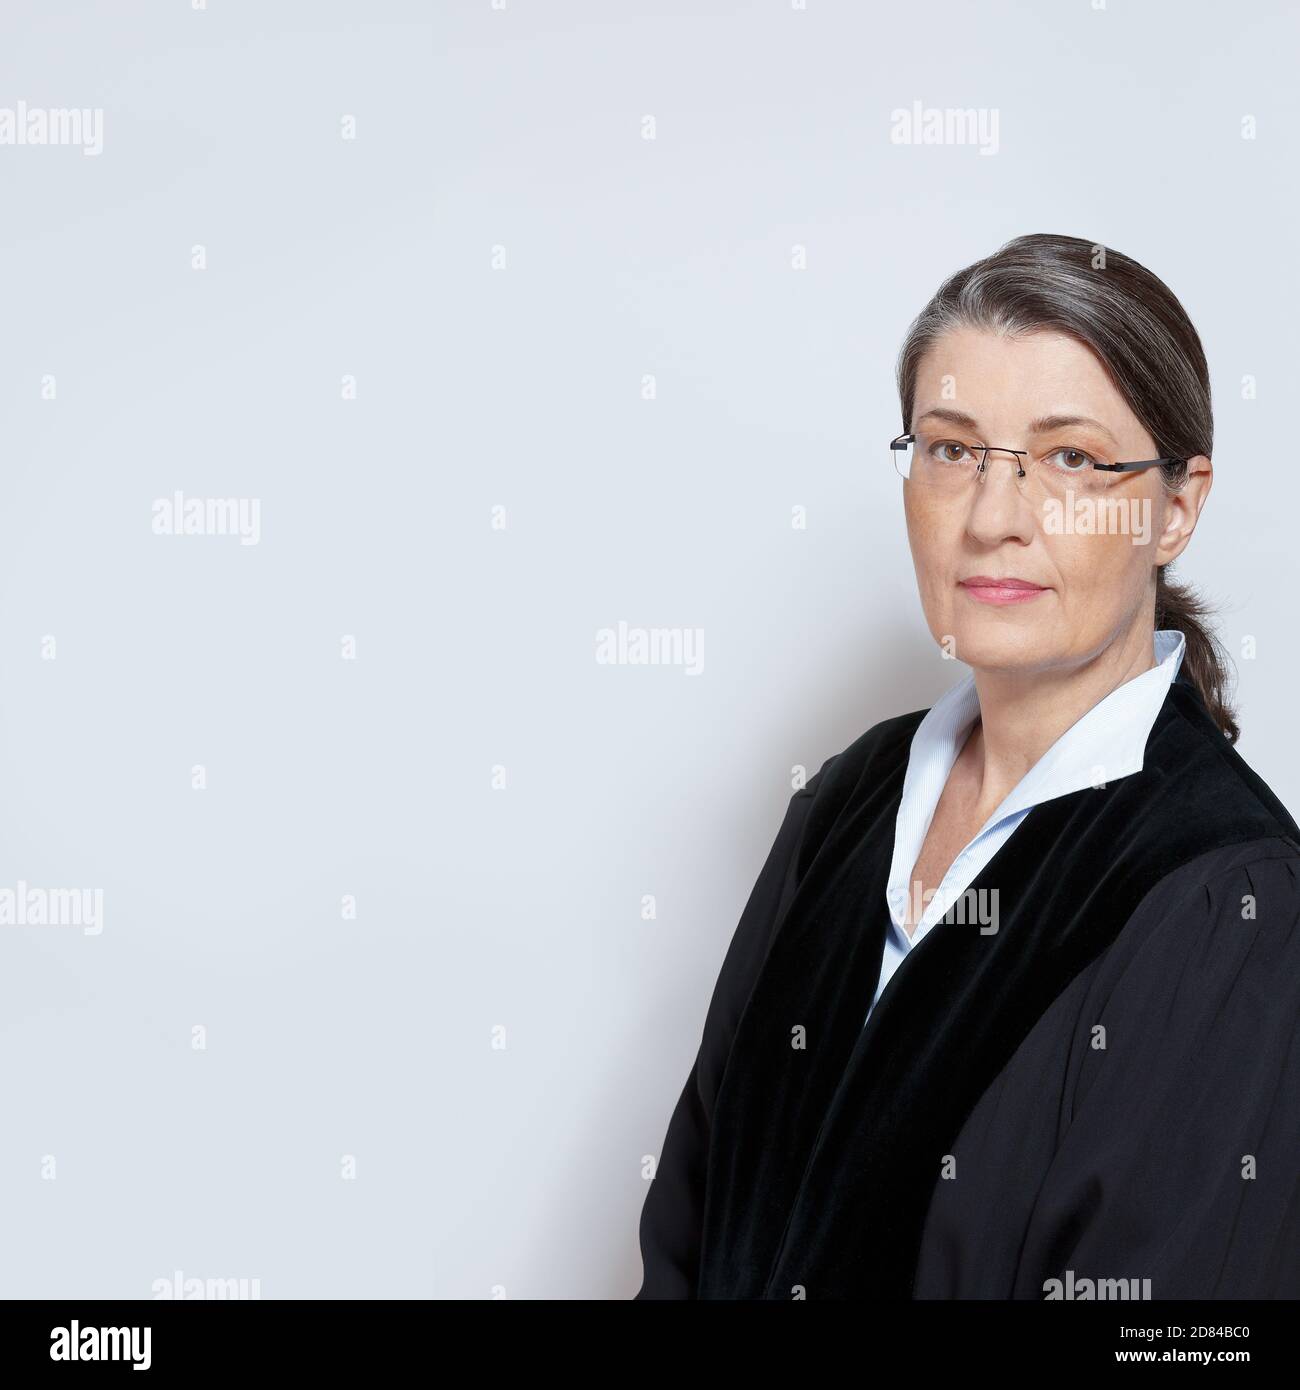 Portrrait of a middle aged female judge in black robe, neutral background, copyspace. Stock Photo